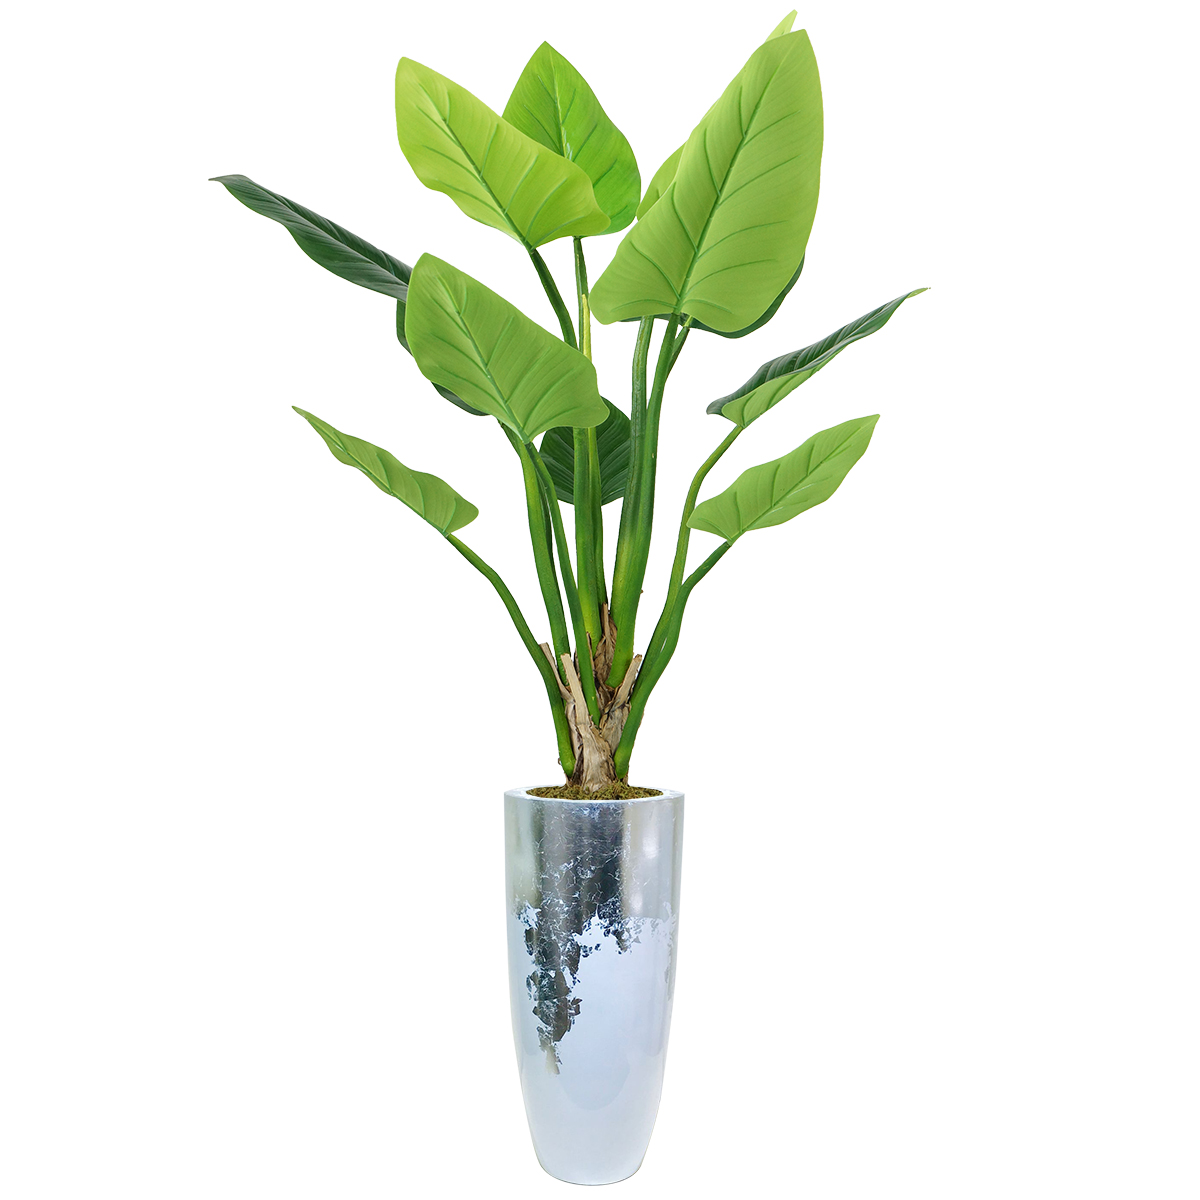 Vhx136220 92.5 In. Philodendron Erubescens Green Emerald Plant In Resin Planter